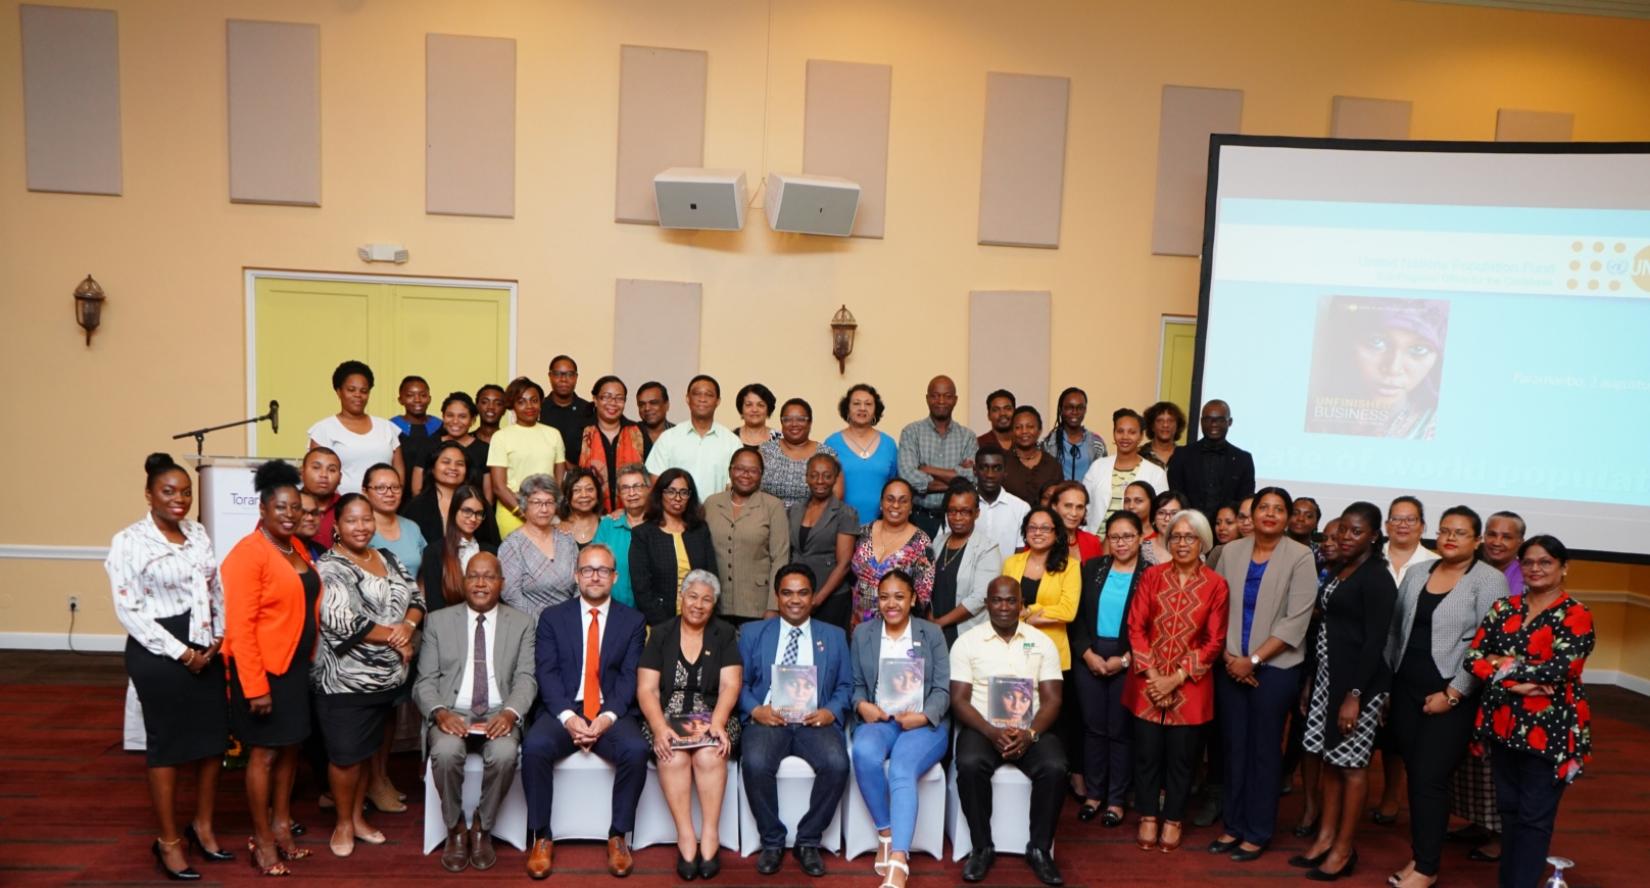 2019 State of World Population Report in Suriname dialogues